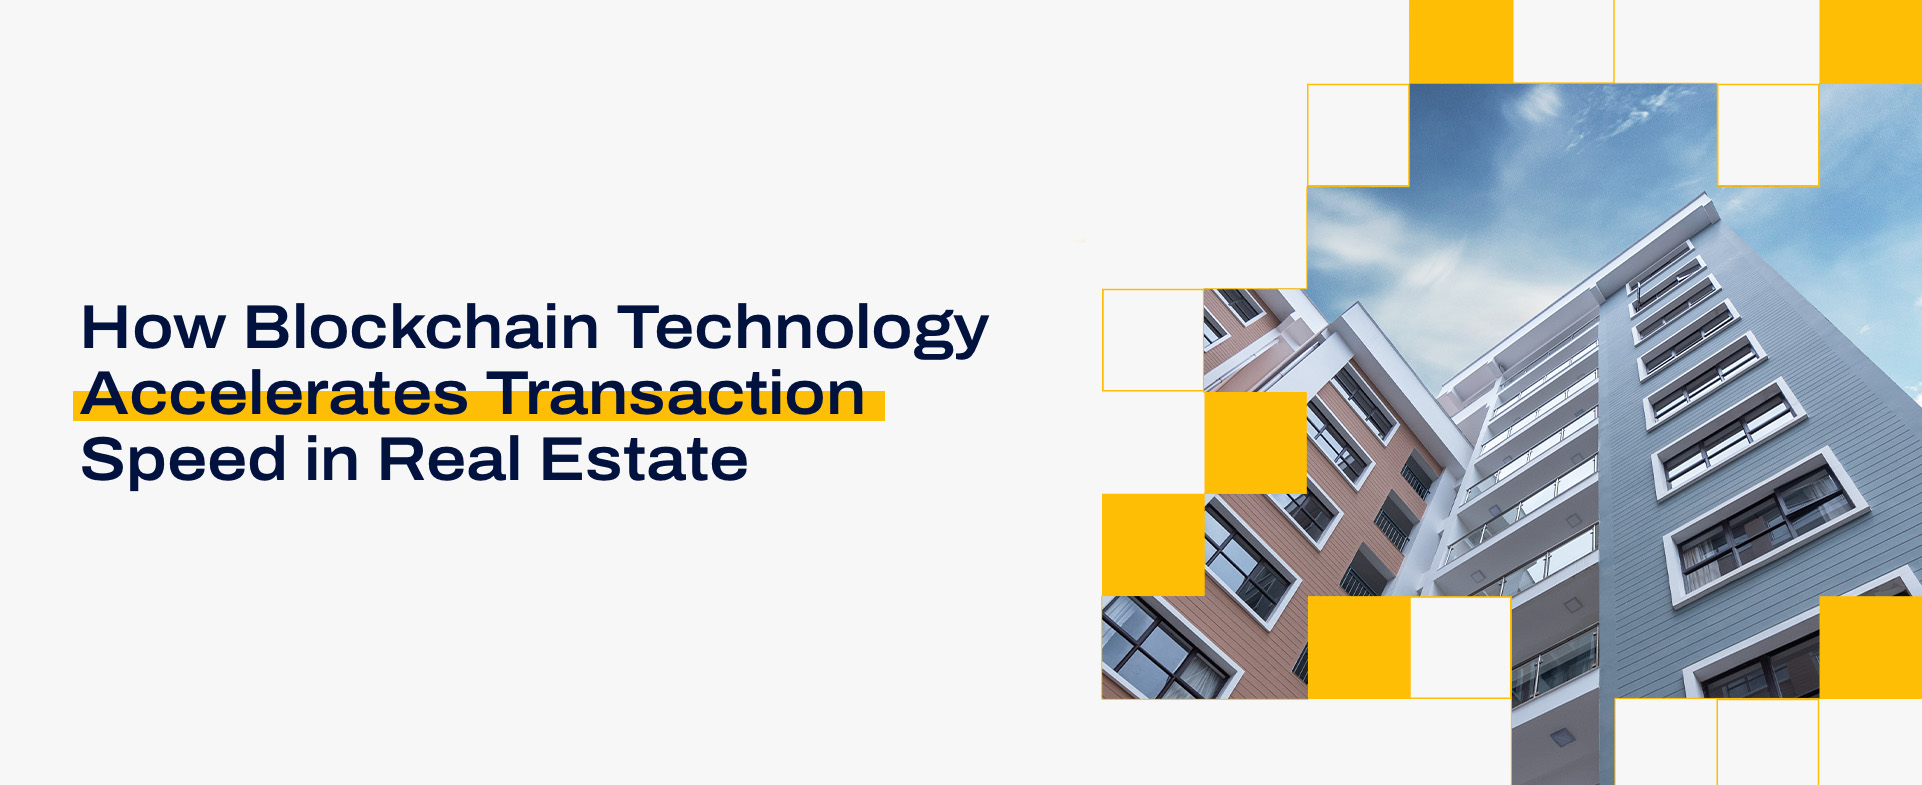 How Blockchain Could Accelerate the Pace of the Real Estate Investing Industry